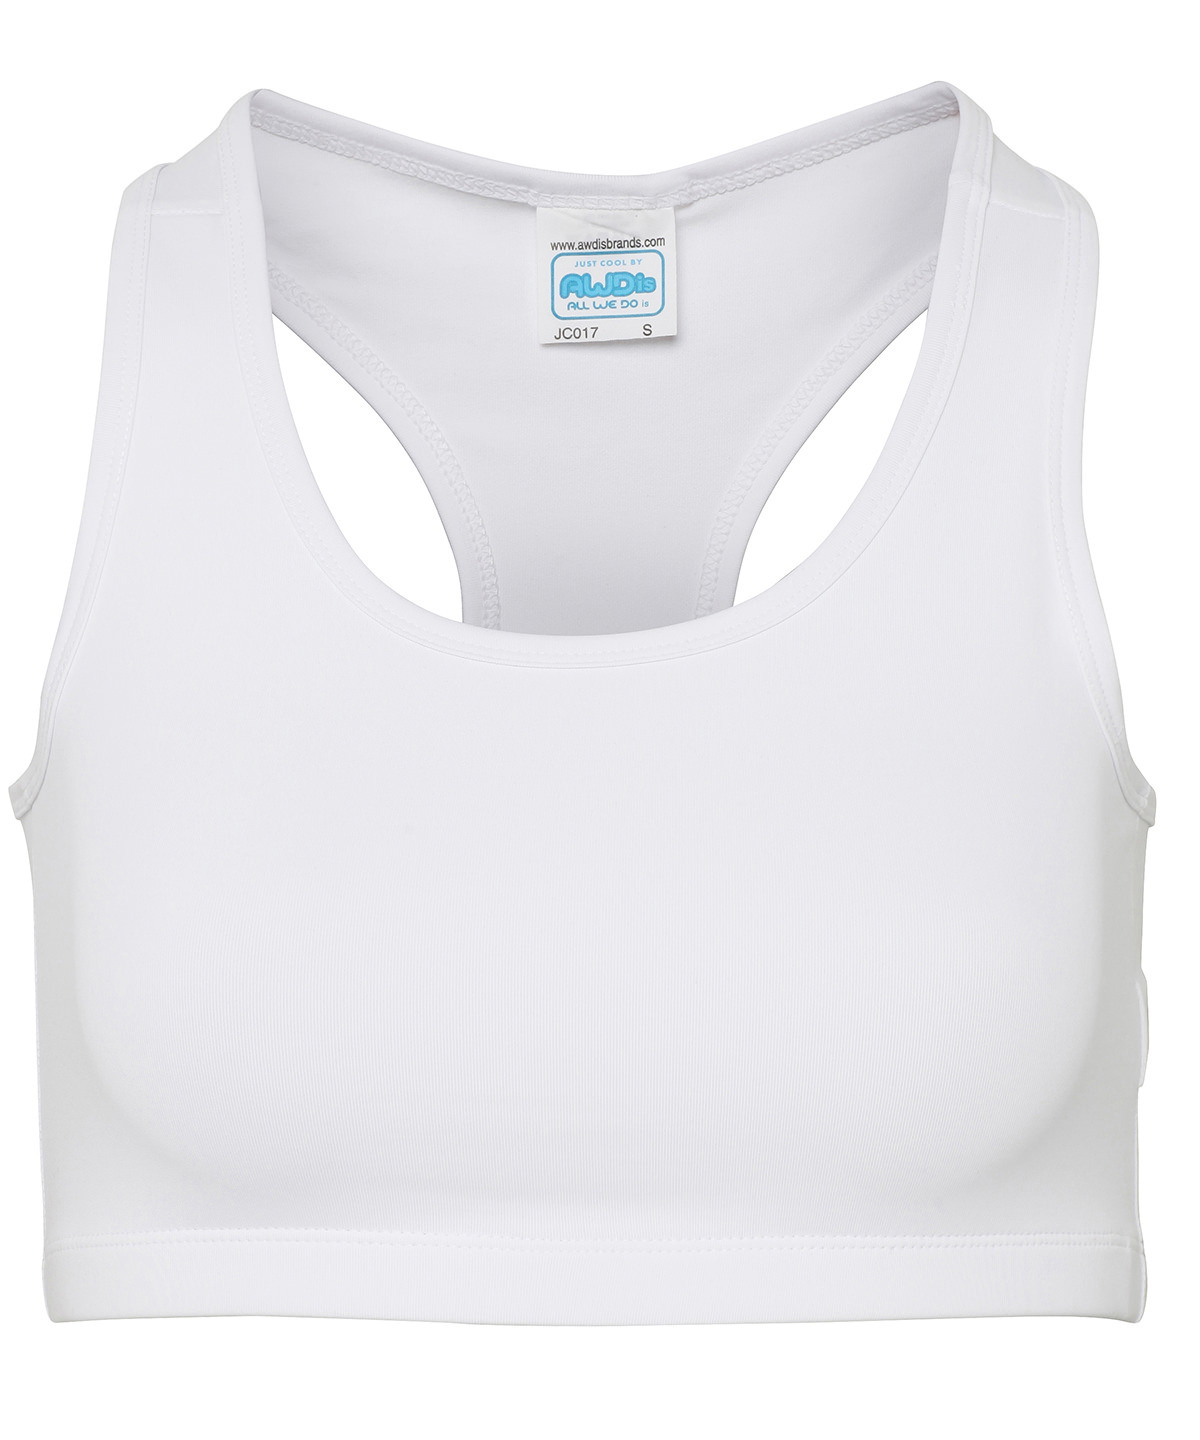 Womens Cool Sports Crop Top Arctic White Size Large